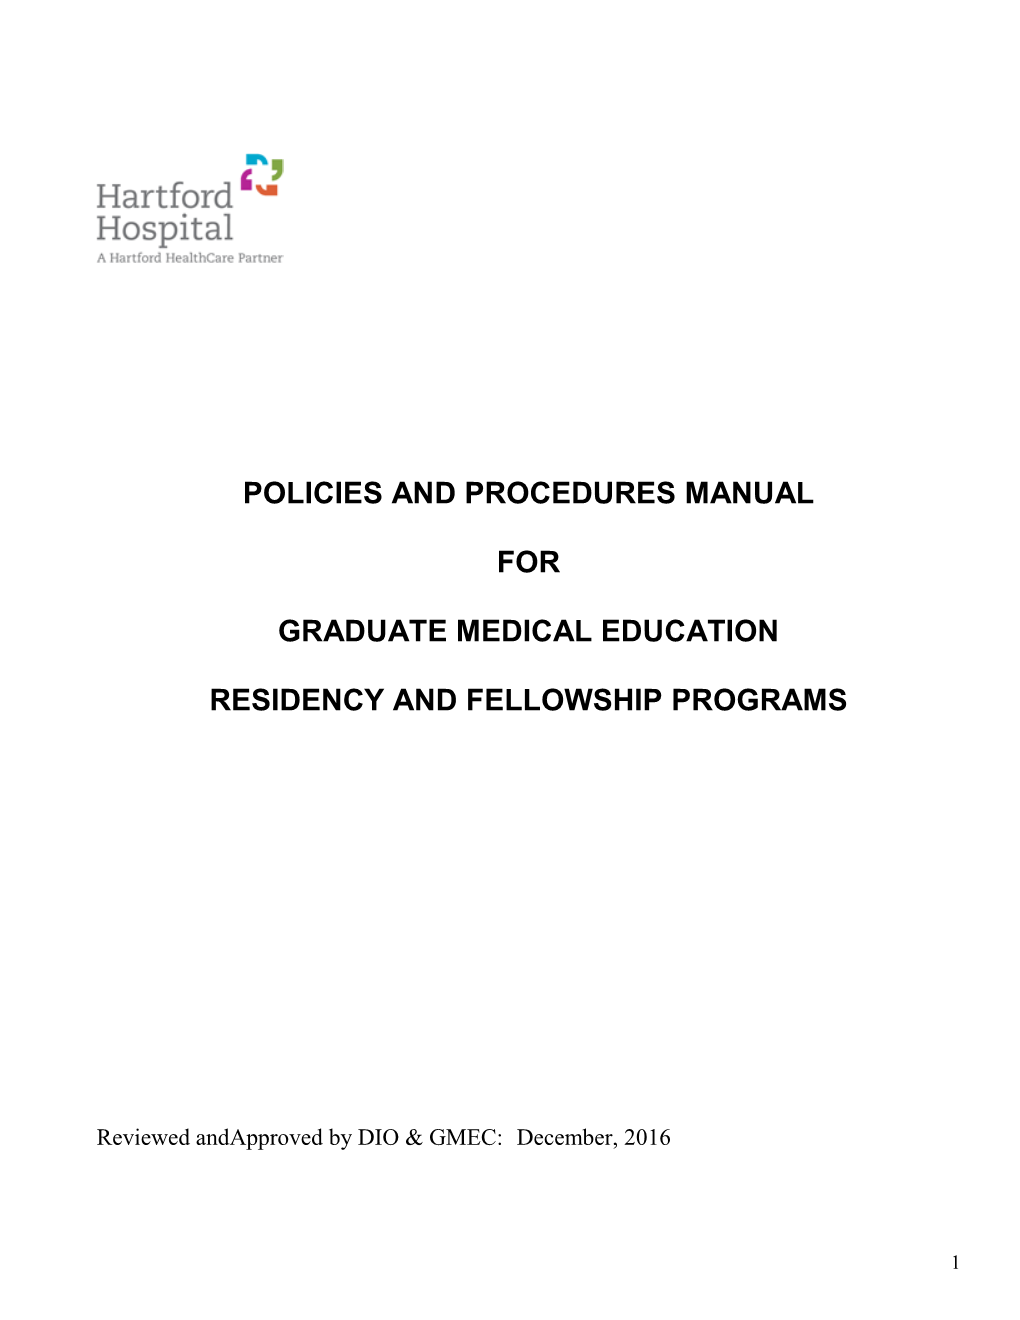 Policies and Procedures Manual for Graduate Medical Education Residency and Fellowship Programs Has Been Developed As a Guide and a Resource for Residents/Fellows